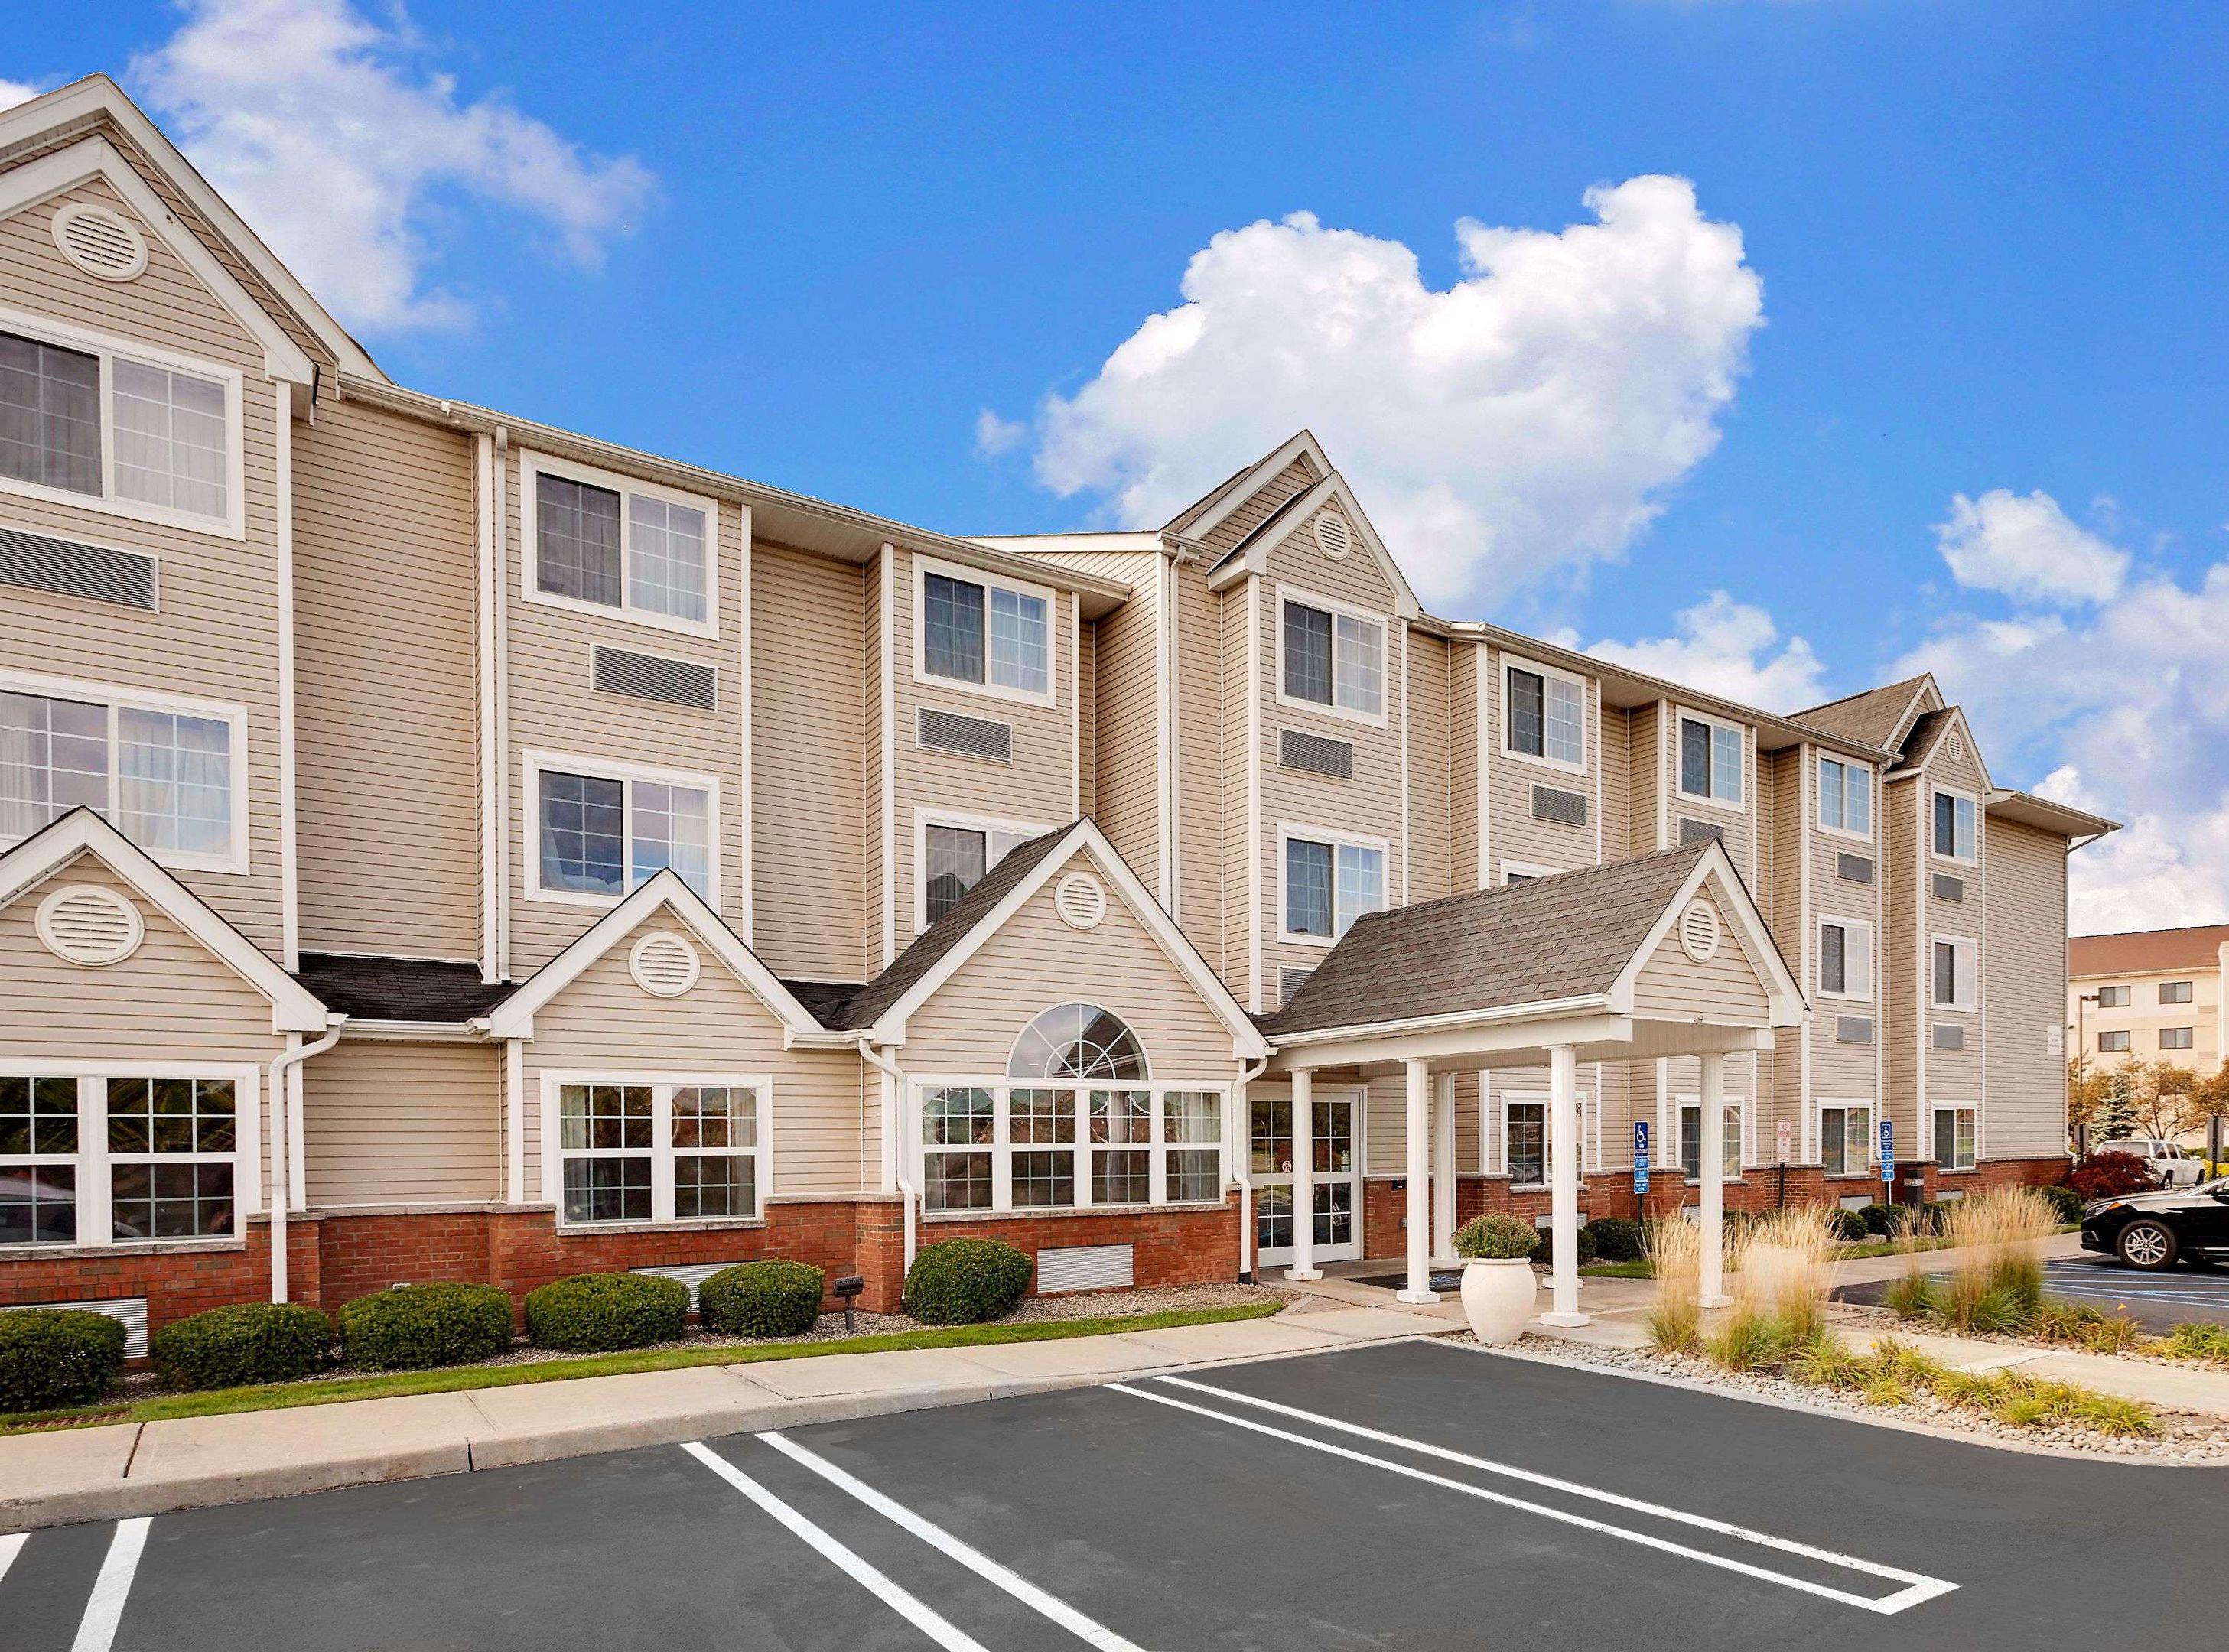 Microtel Inn & Suites Middletown